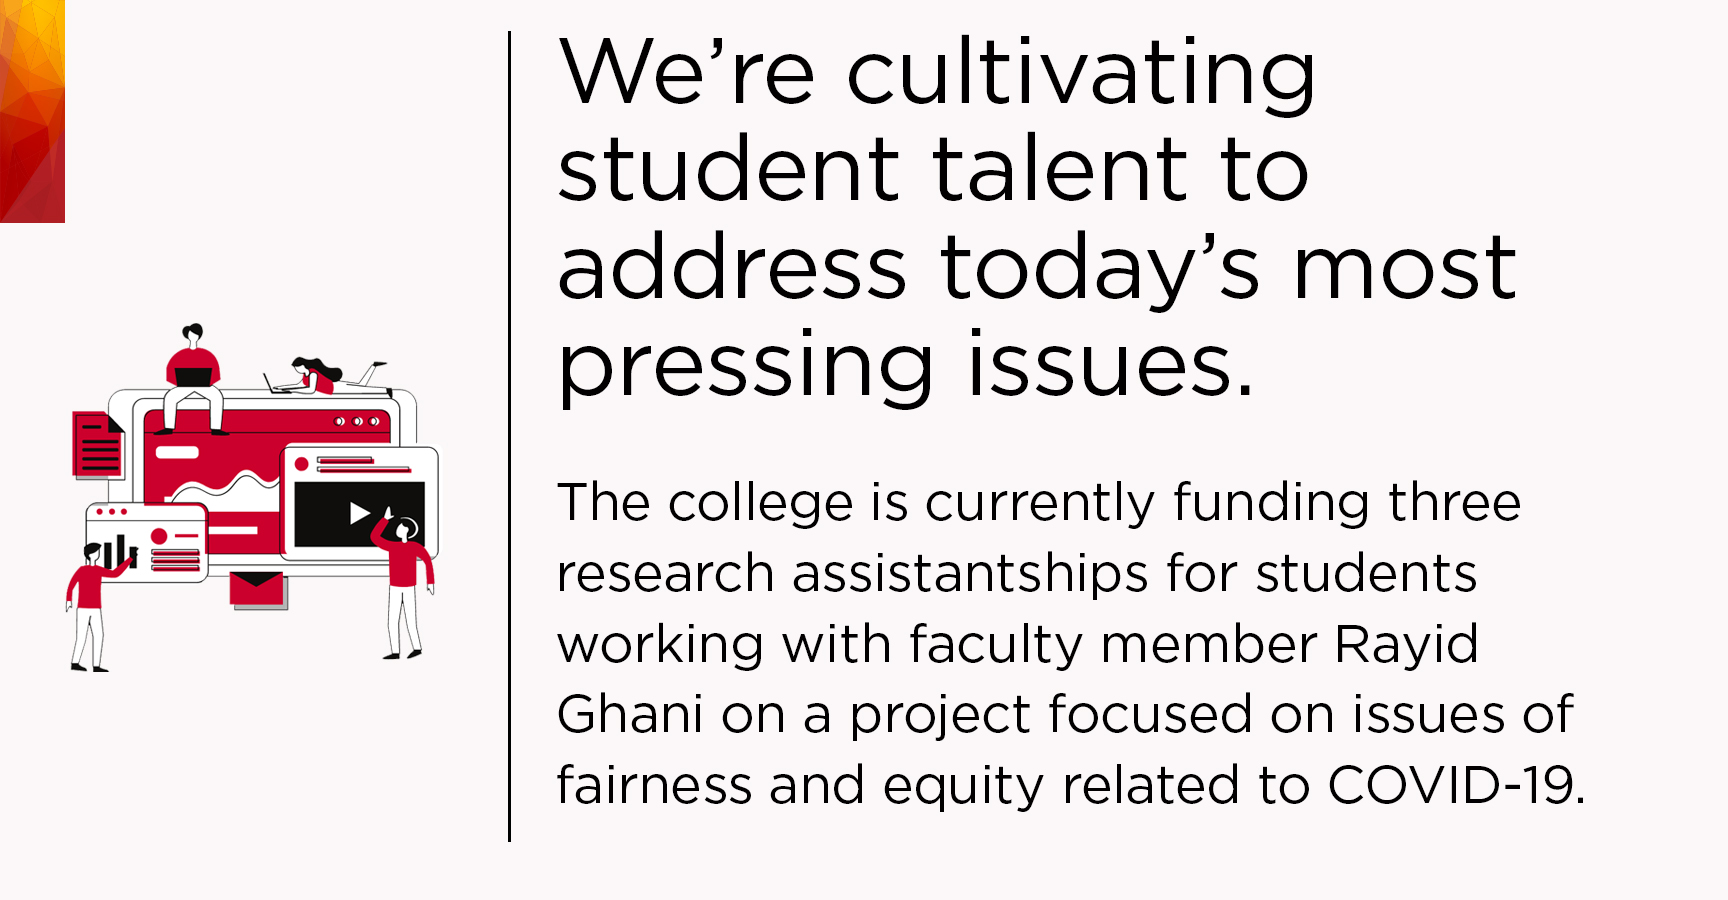 funding three research assistantships